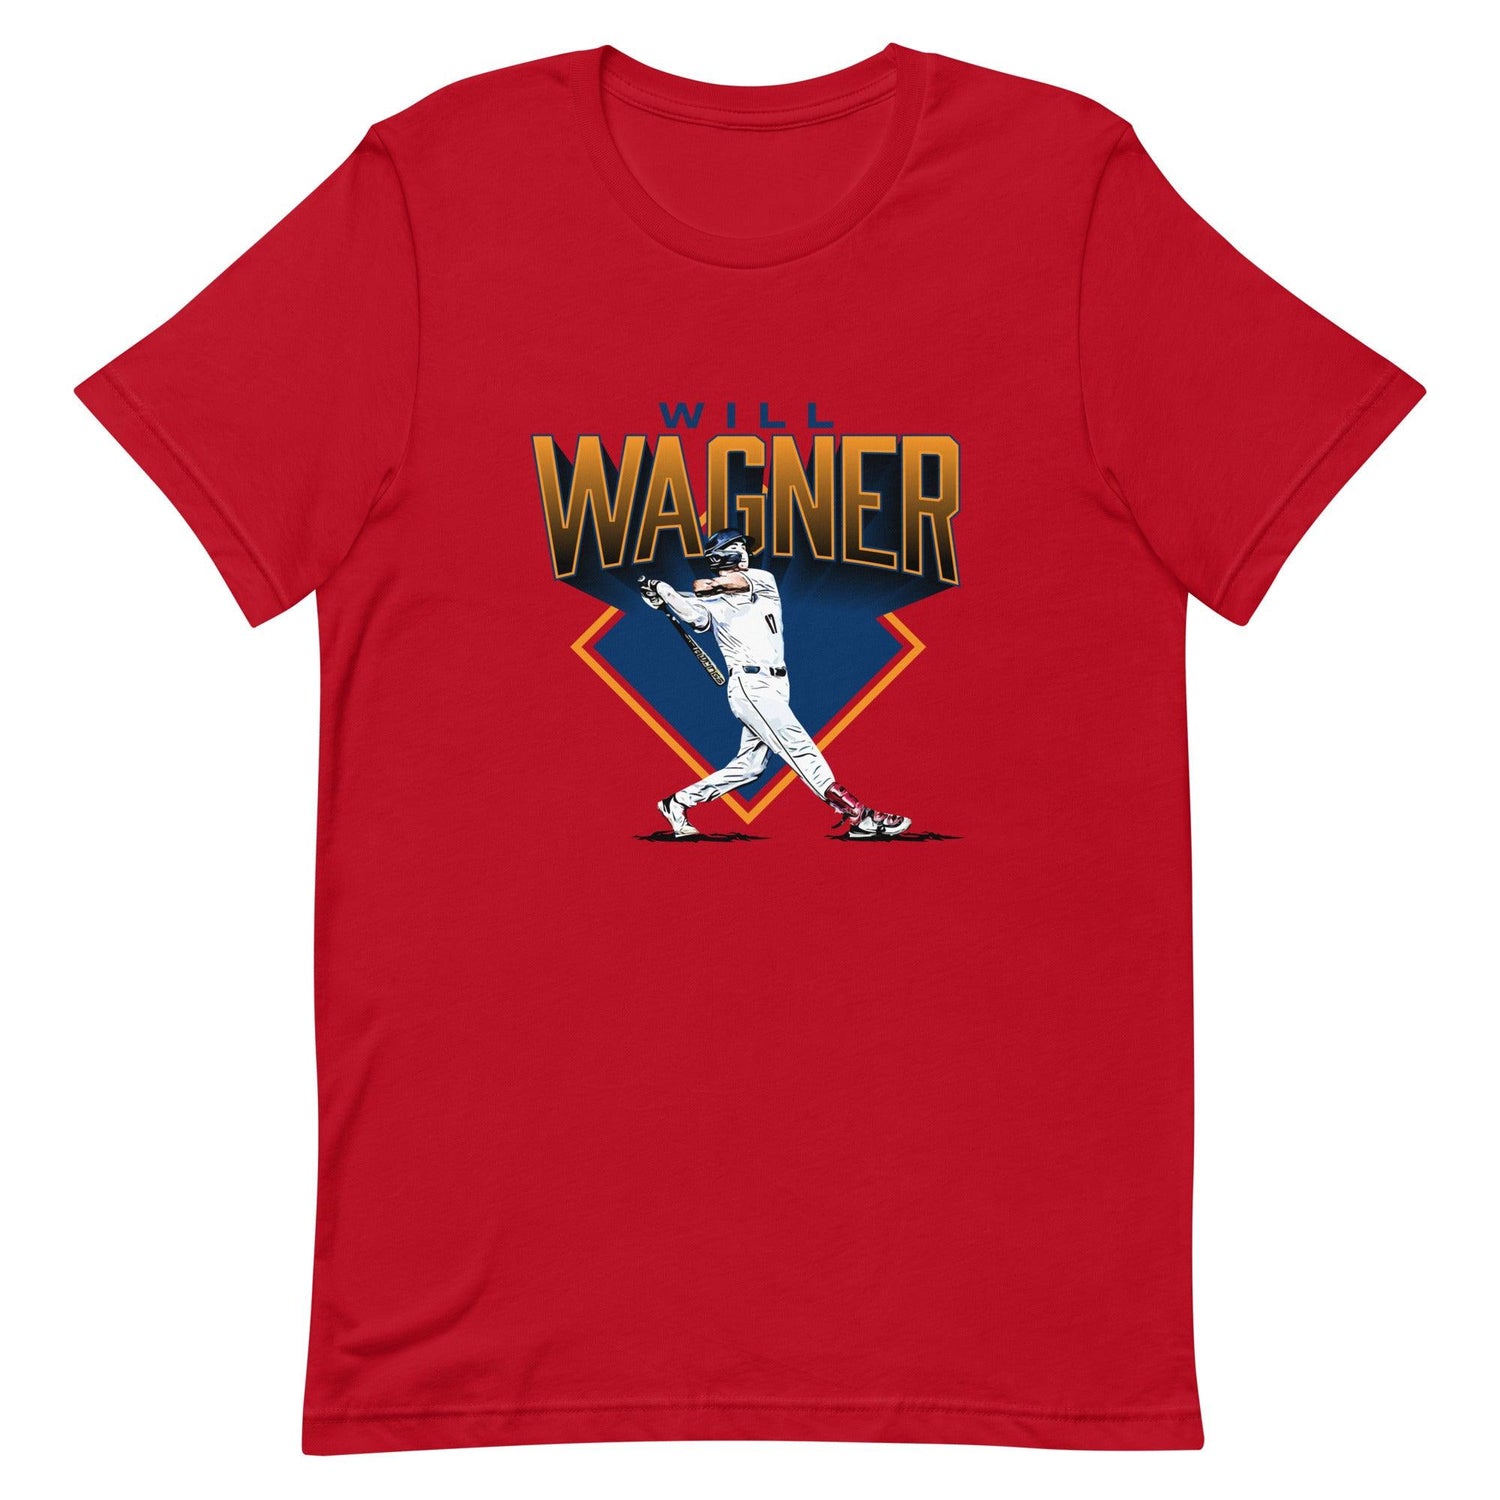 Will Wagner "Essential" t-shirt - Fan Arch